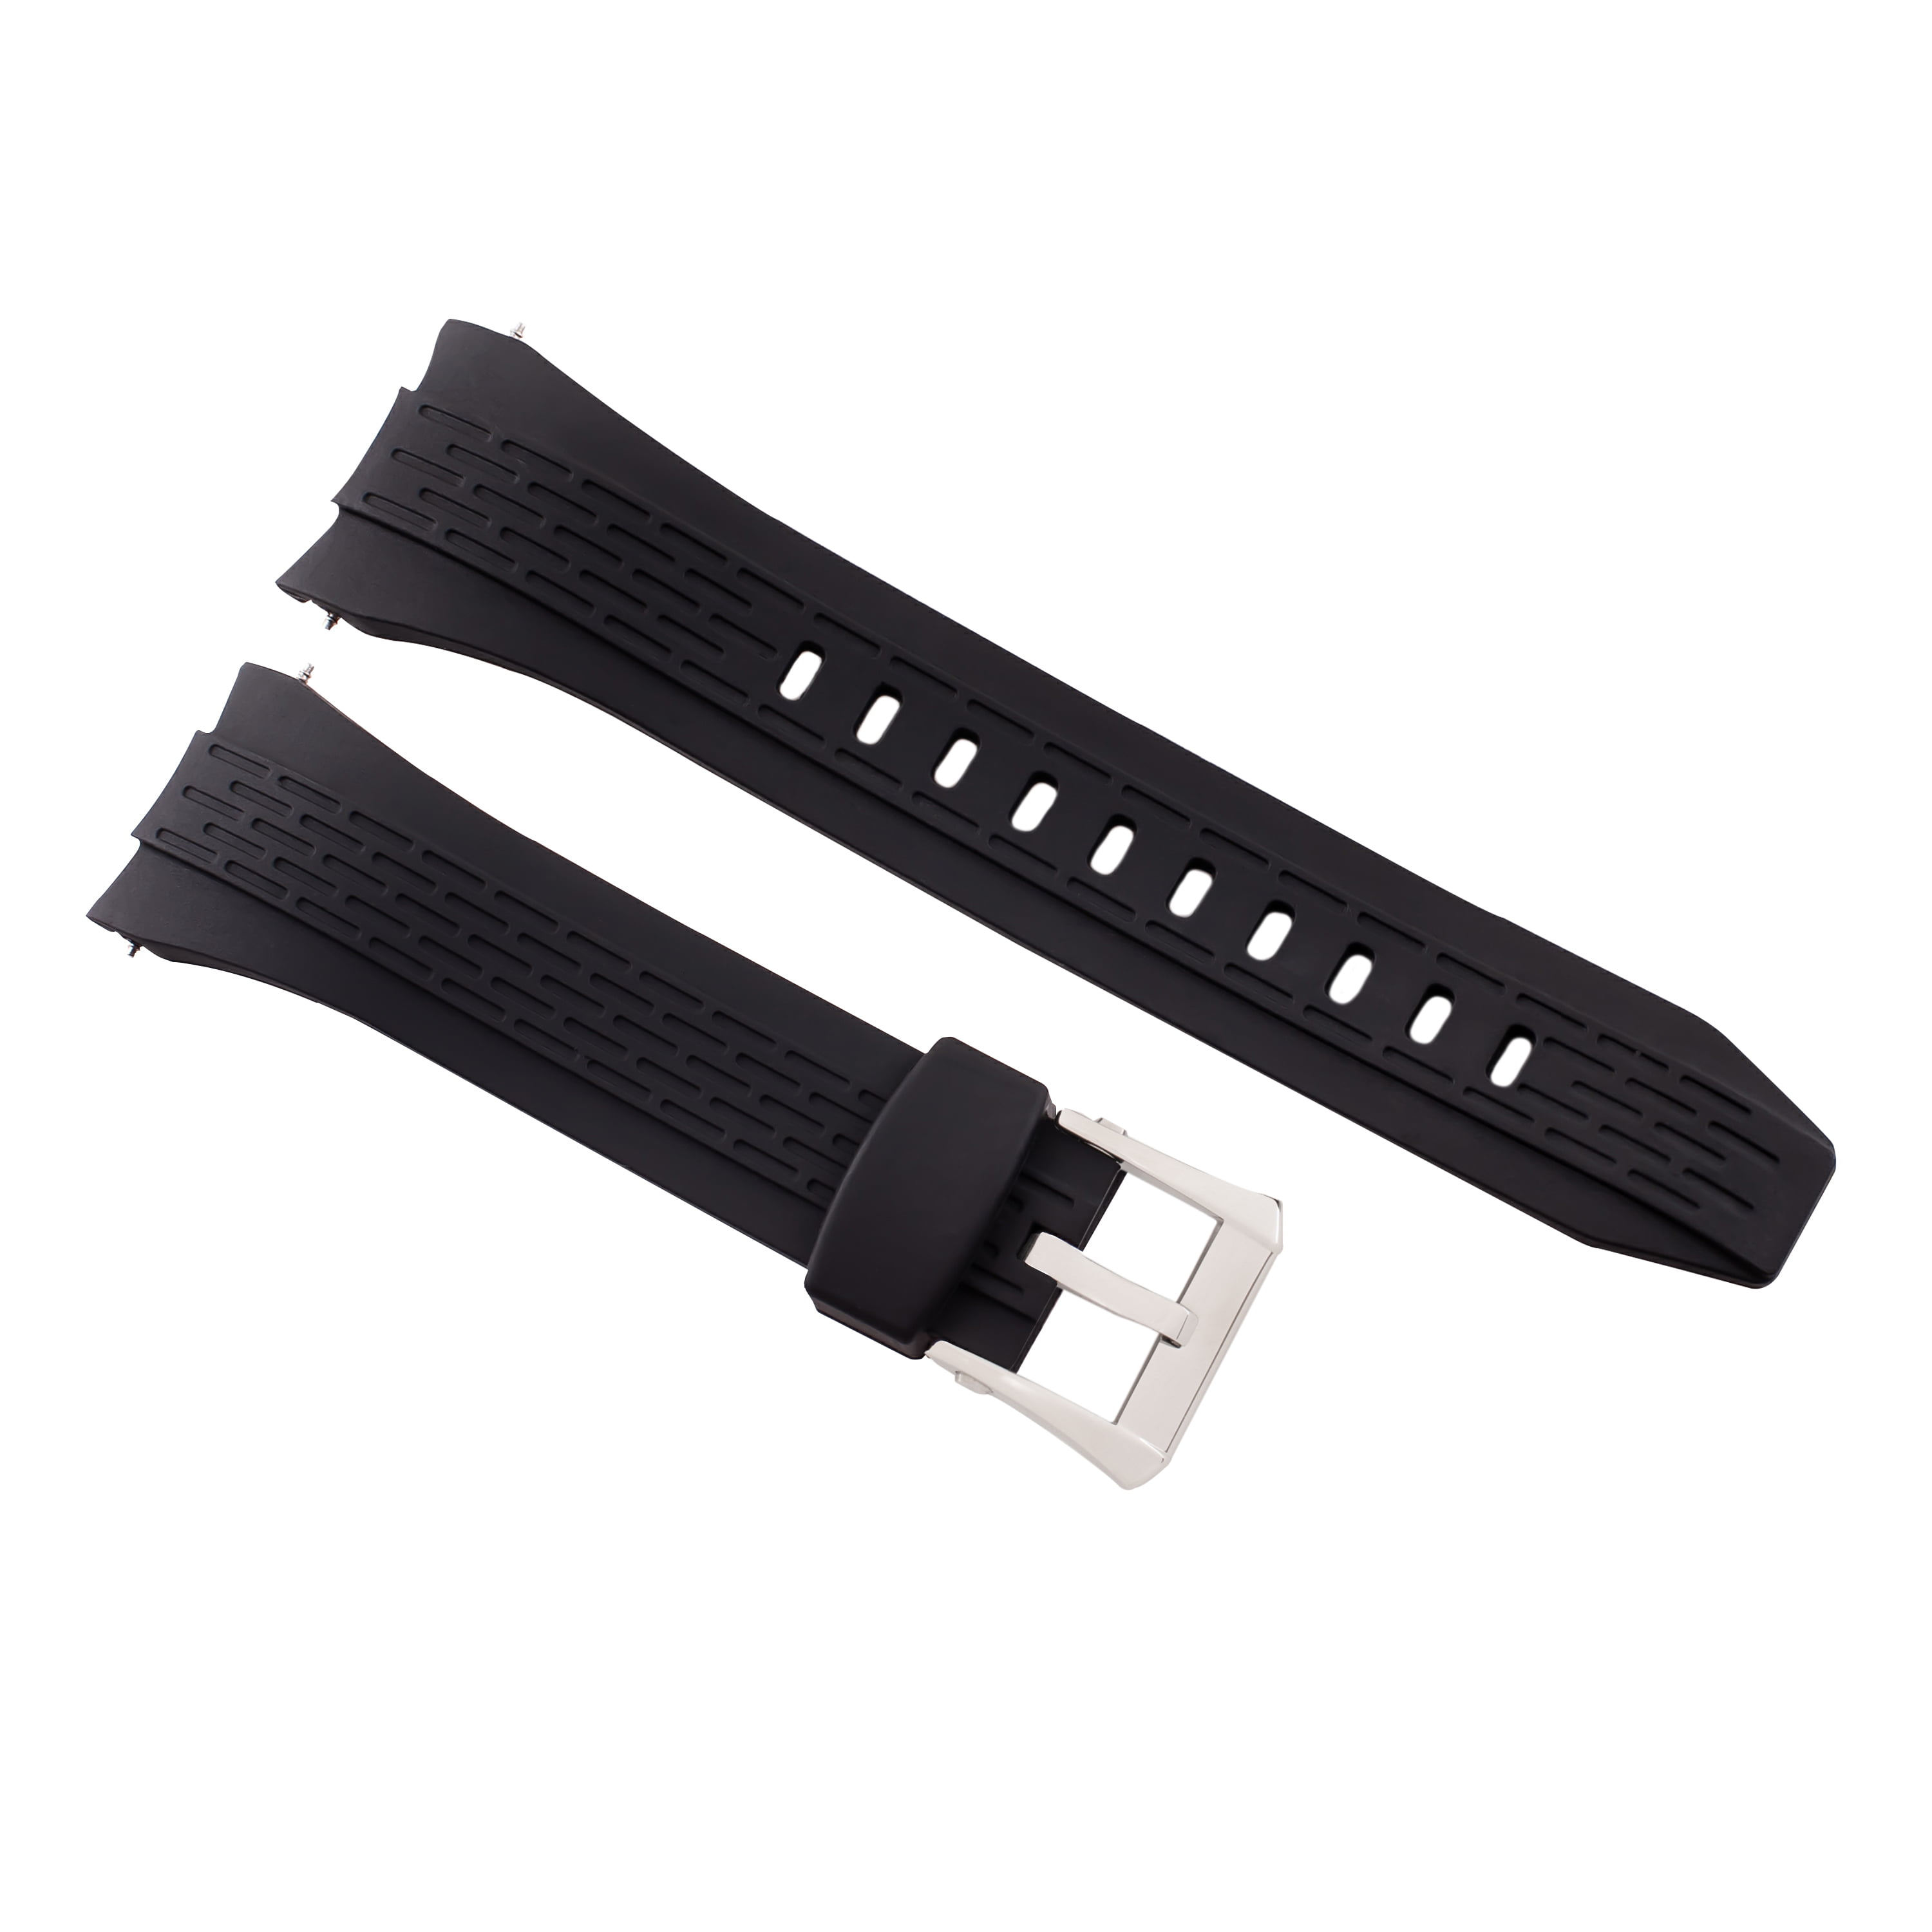 26MM RUBBER WATCH BAND STRAP FOR SEIKO VELATURA KINETIC 7T62 BLACK + BUCKLE  T/Q 